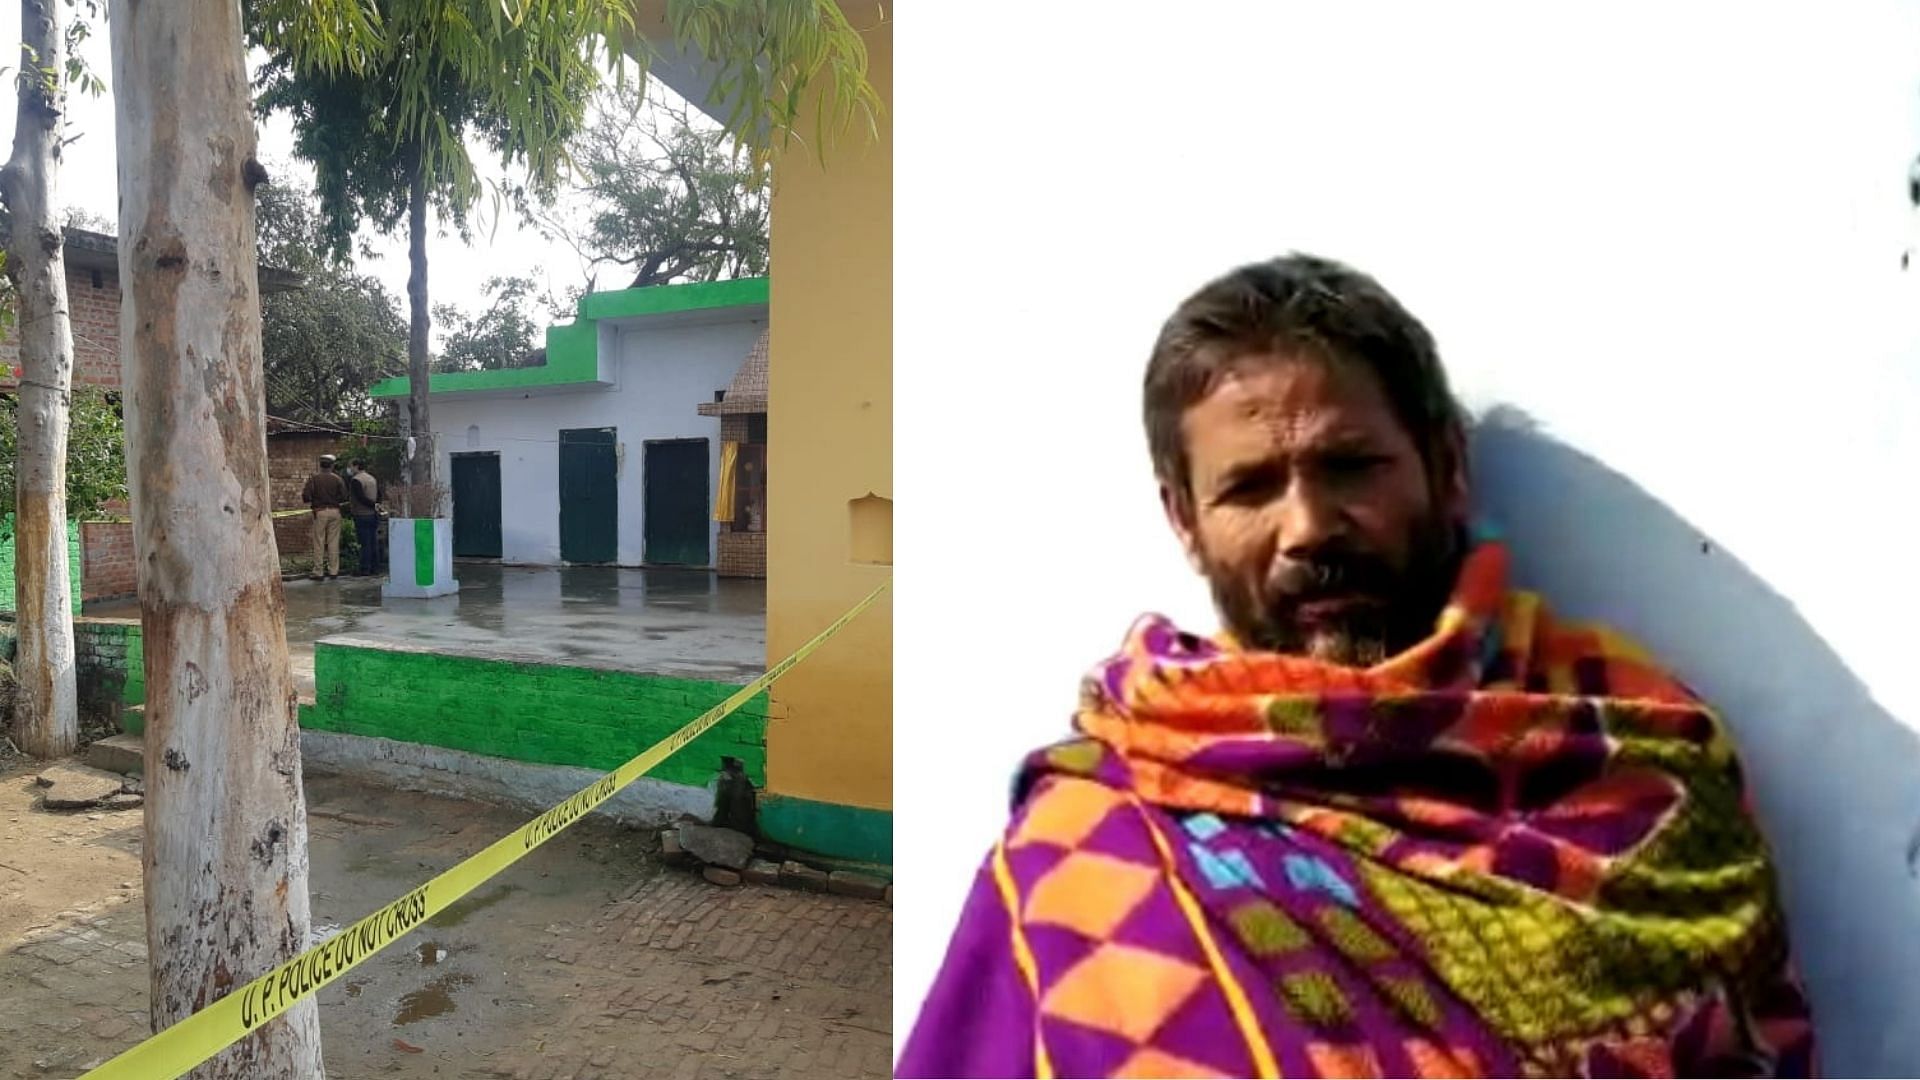 The temple priest, main accused in the case, has been identified as Satyanand.